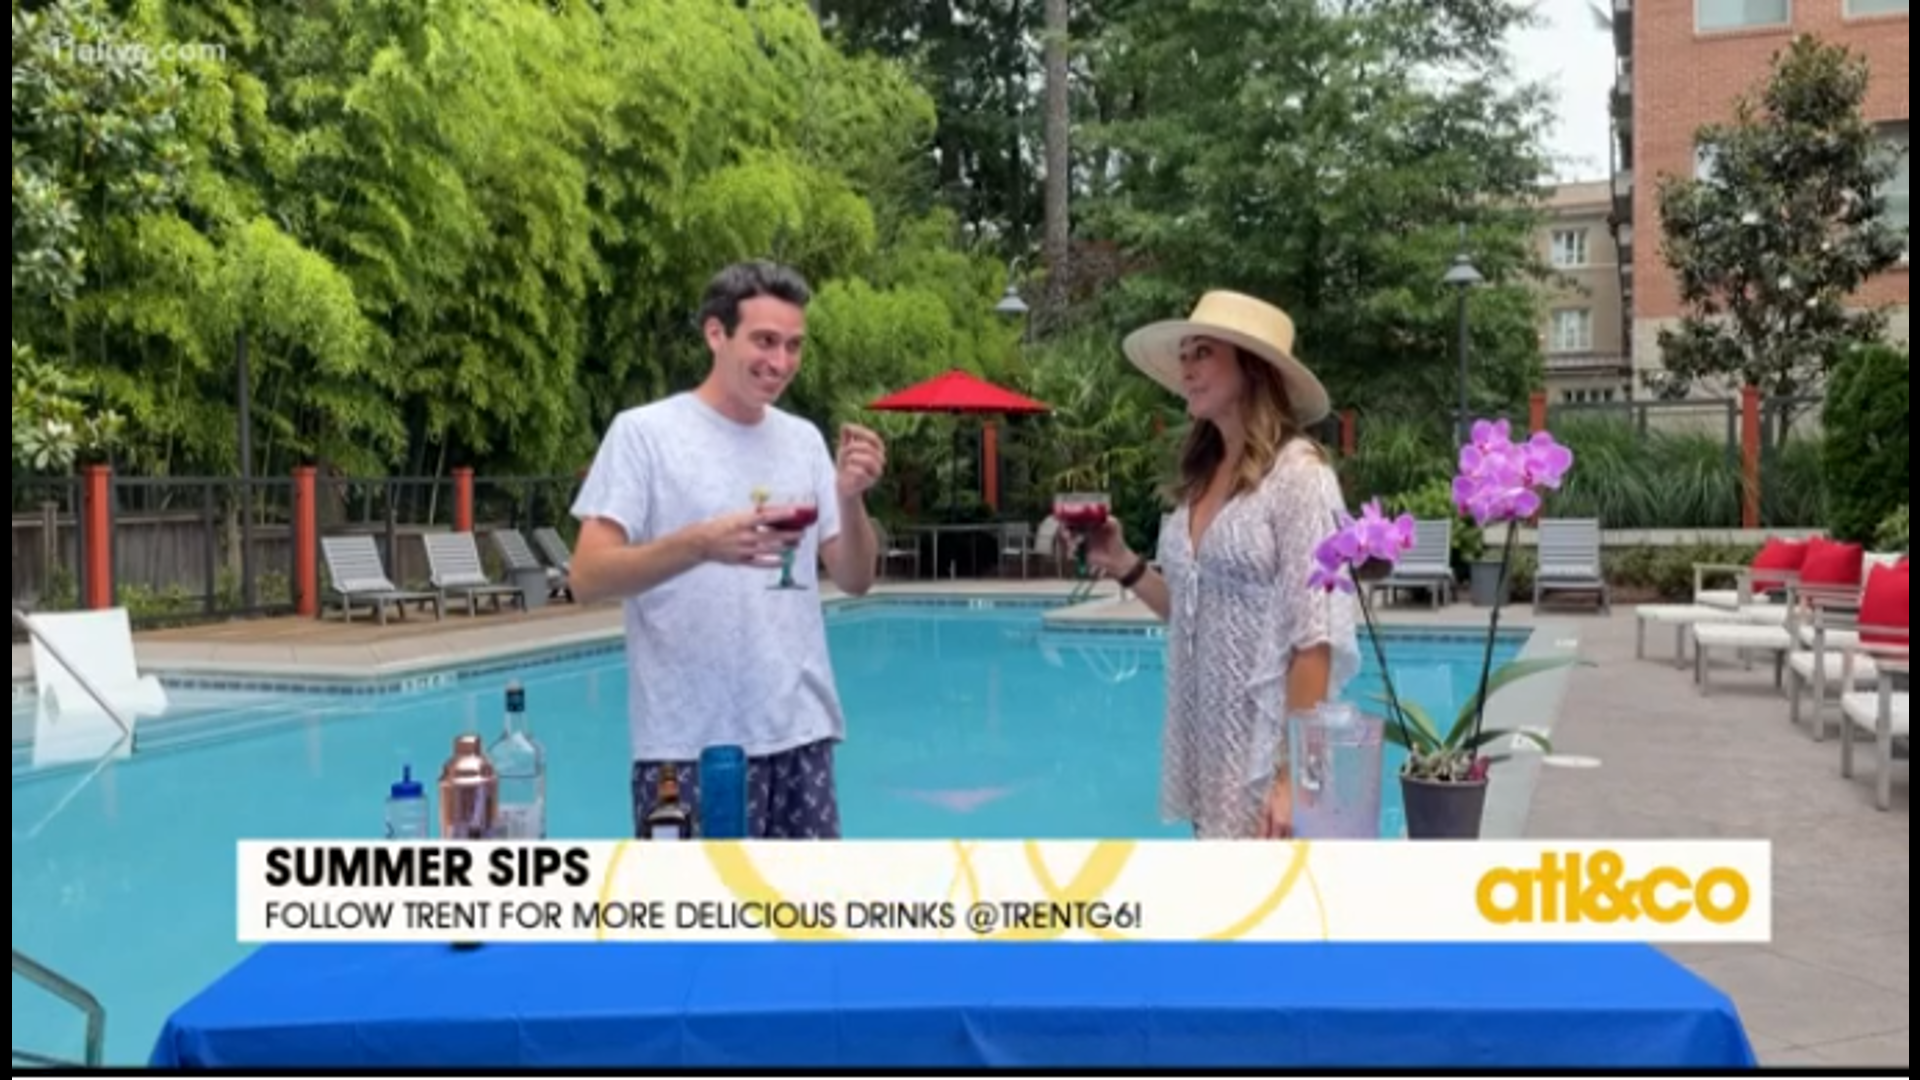 Trending with Trent blends up a refreshing blueberry blanco margarita with Christine poolside.